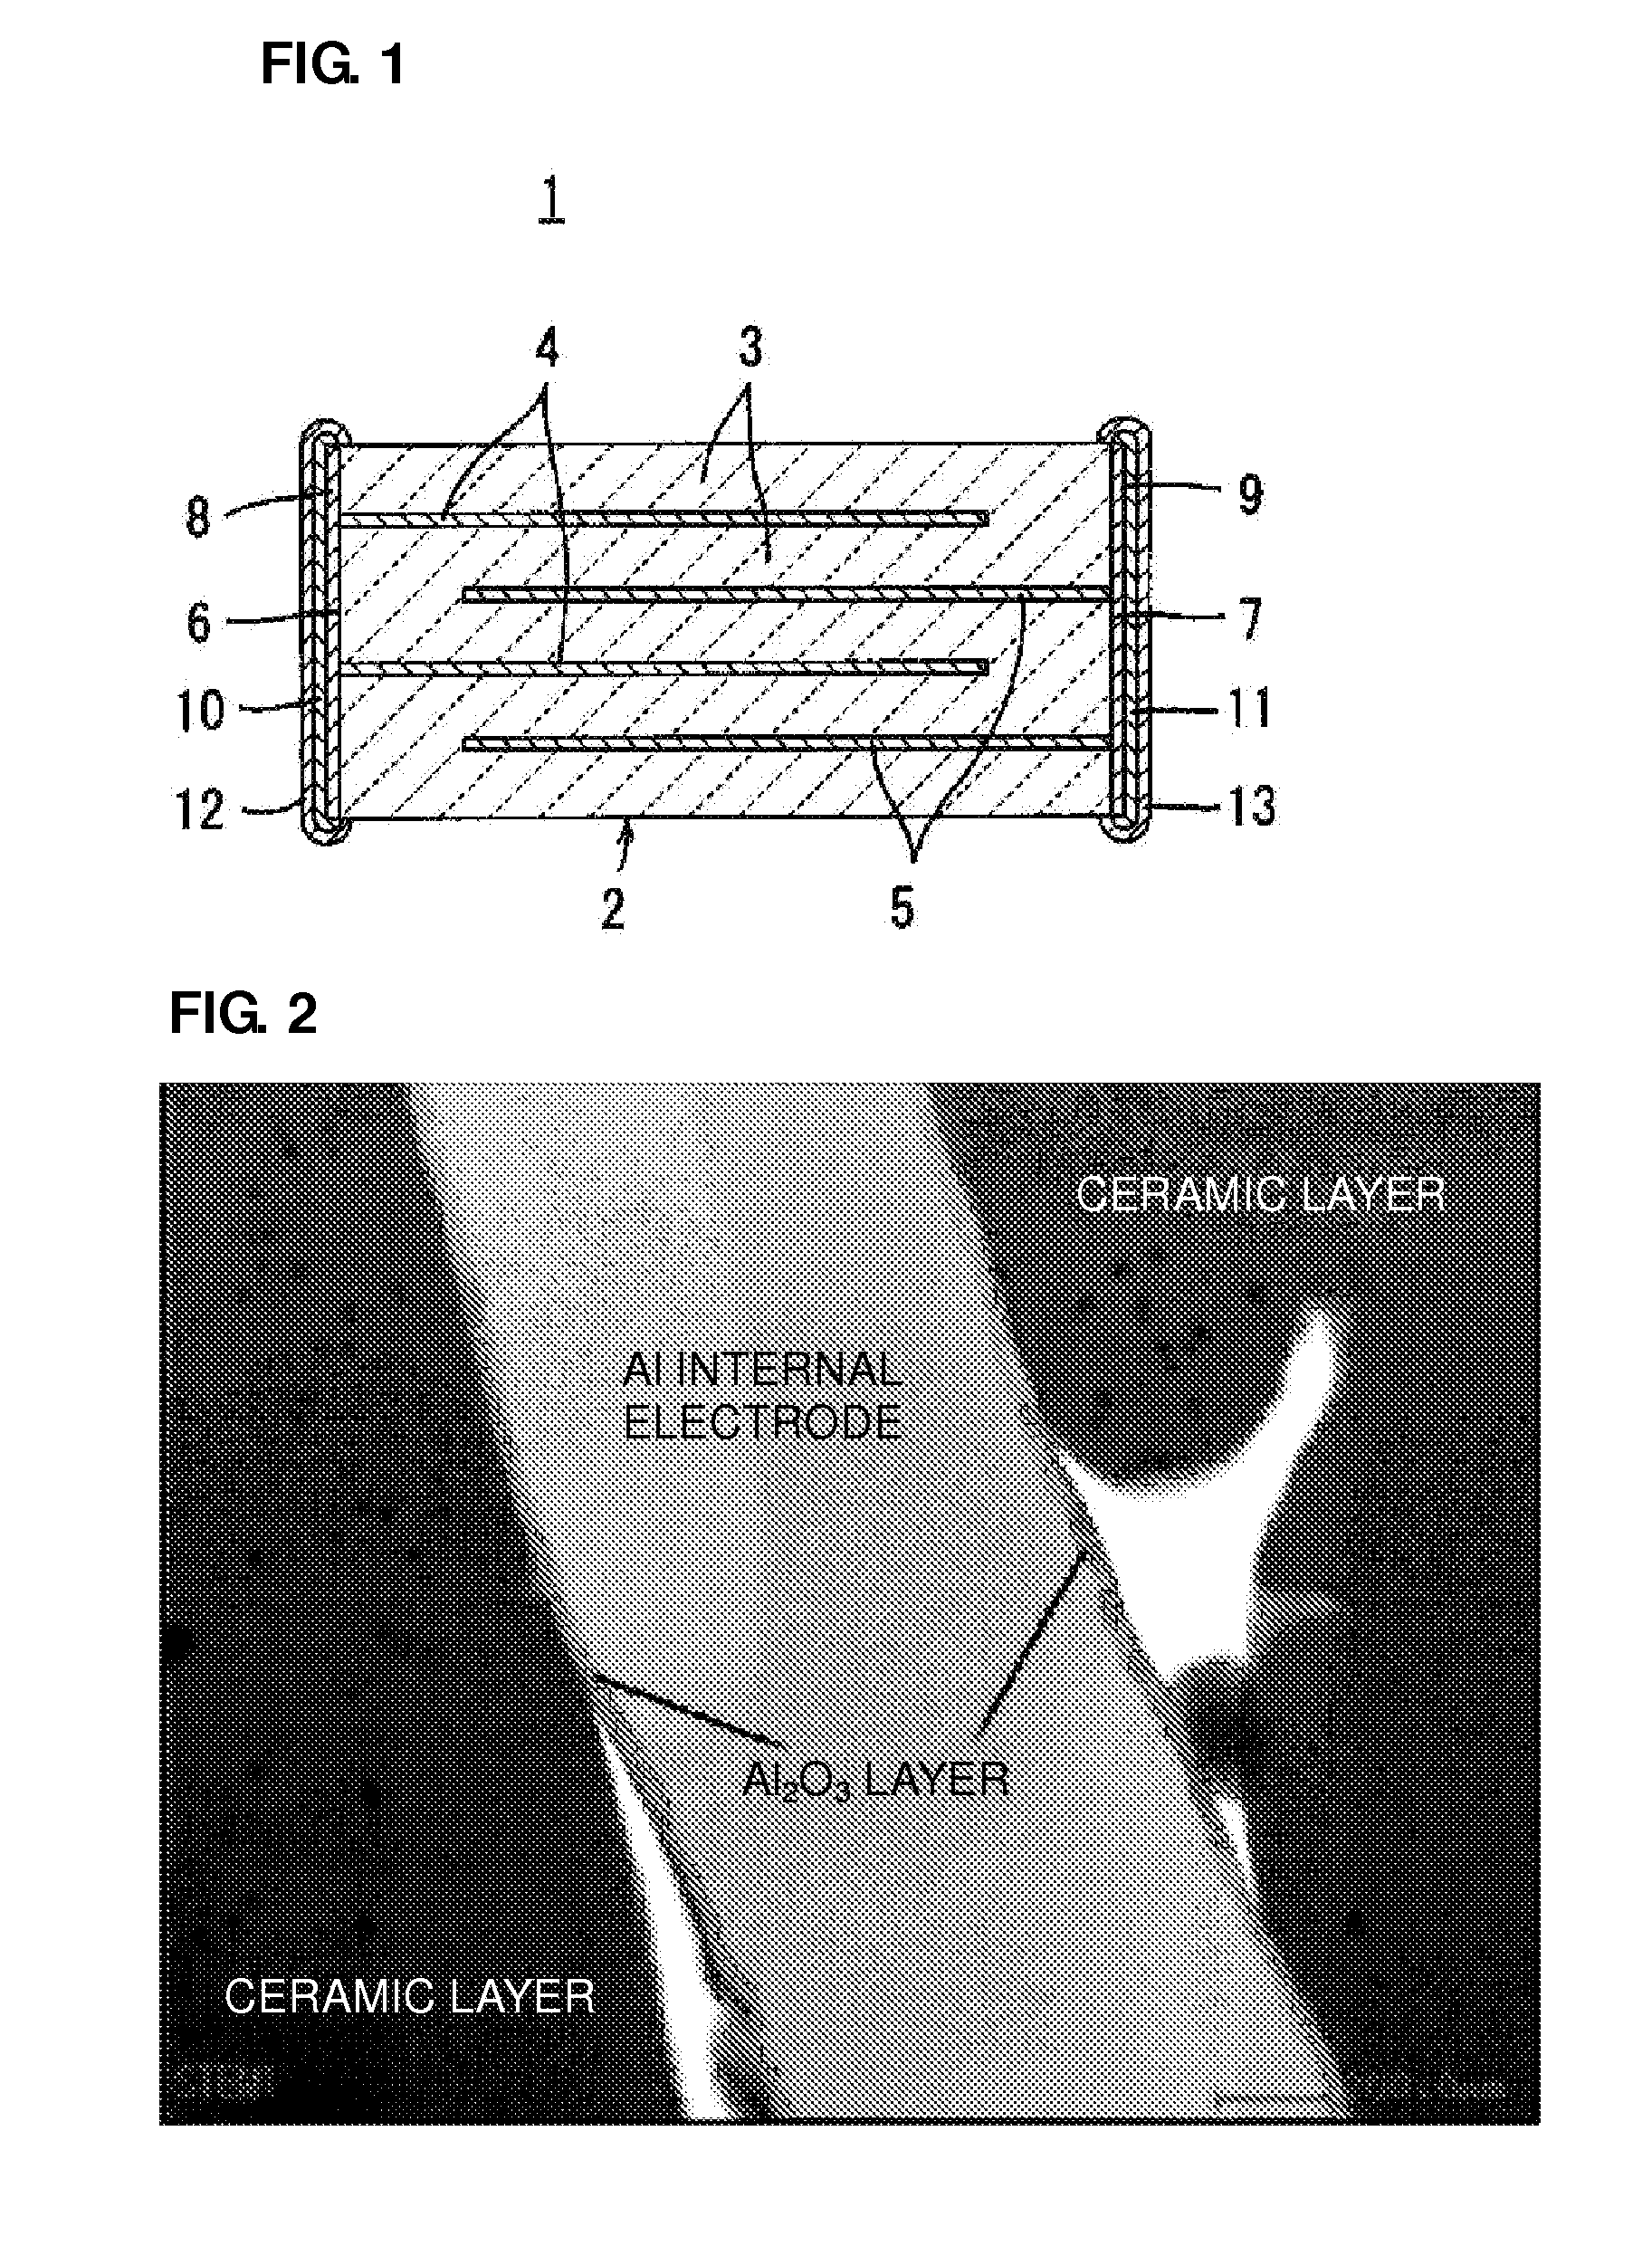 Laminated ceramic electronic component and method for producing laminated ceramic electronic component